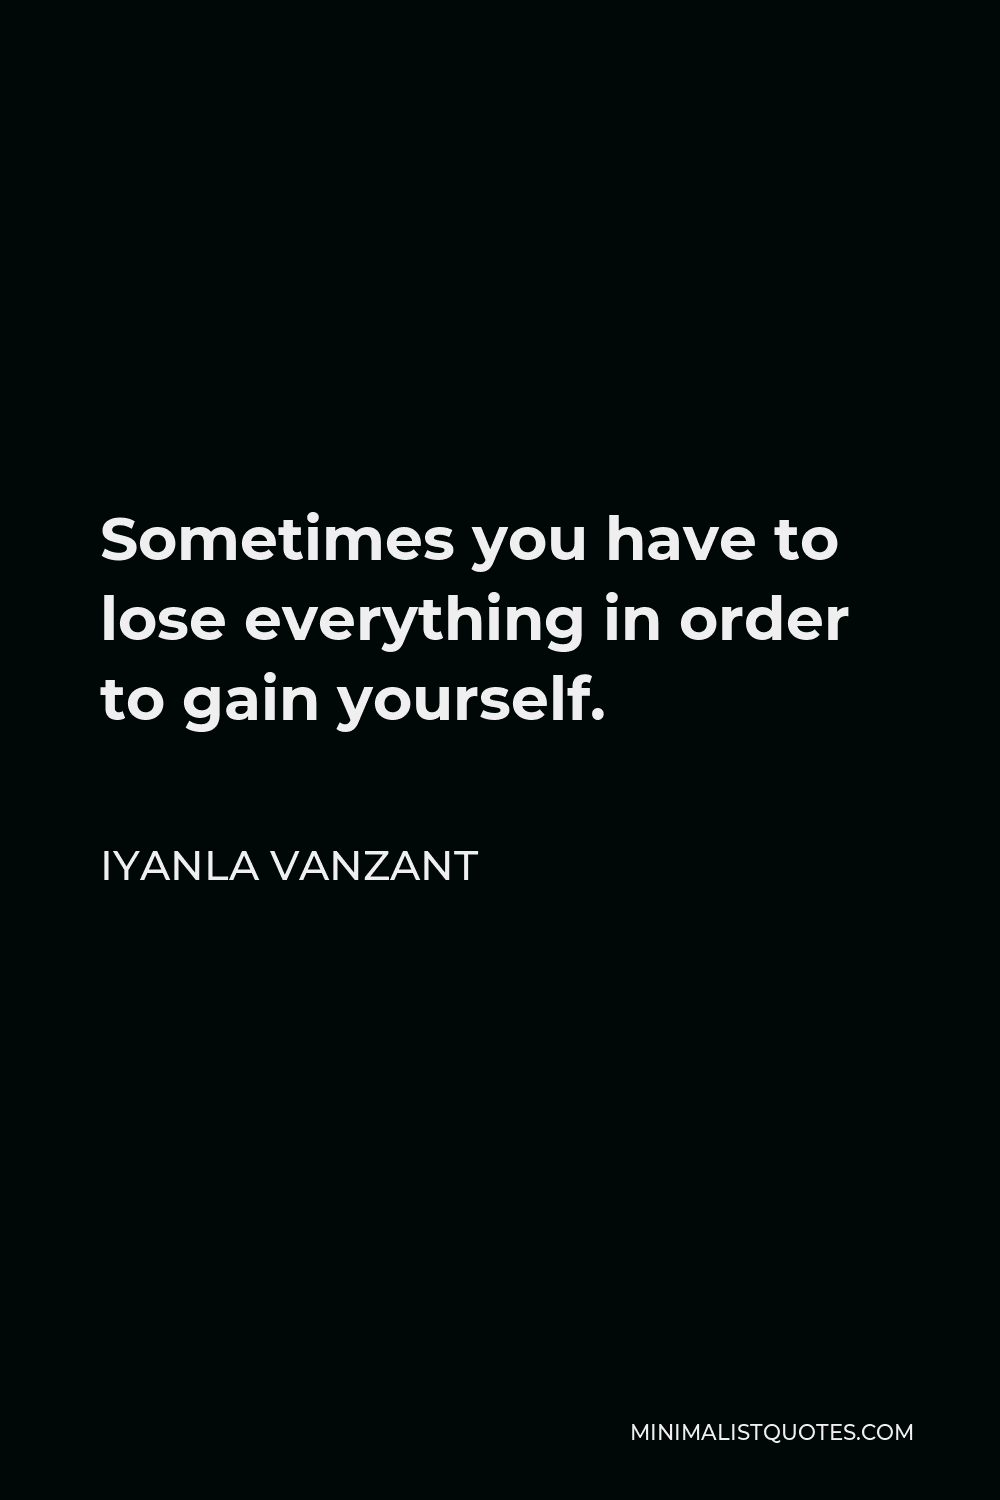 Iyanla Vanzant Quote - Sometimes you have to lose everything in order to gain yourself.